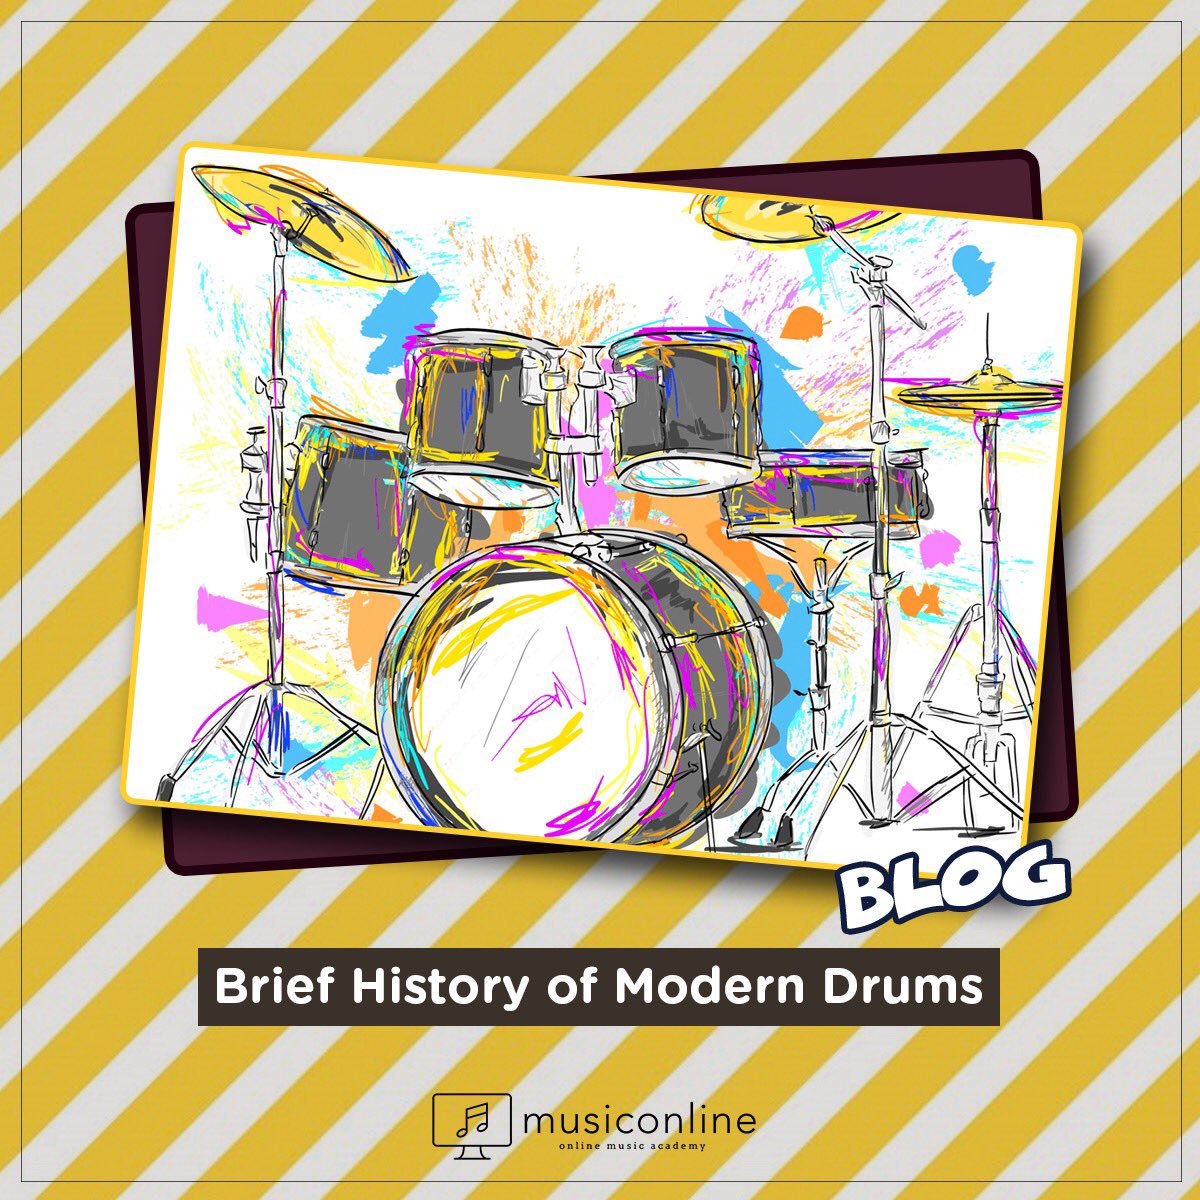 Backbone of modern music, drums is a true star! Check out our blog to learn more about history of modern drums. 

#musiconline #MusicBlog #MusicBlogs #MusicBlogger #MusicBloggers #DrumSetup #DrumPlayer #DrumSets #DrumSet #DrumSolo #DrumHeads #DrummingLife #DrummingCommunity